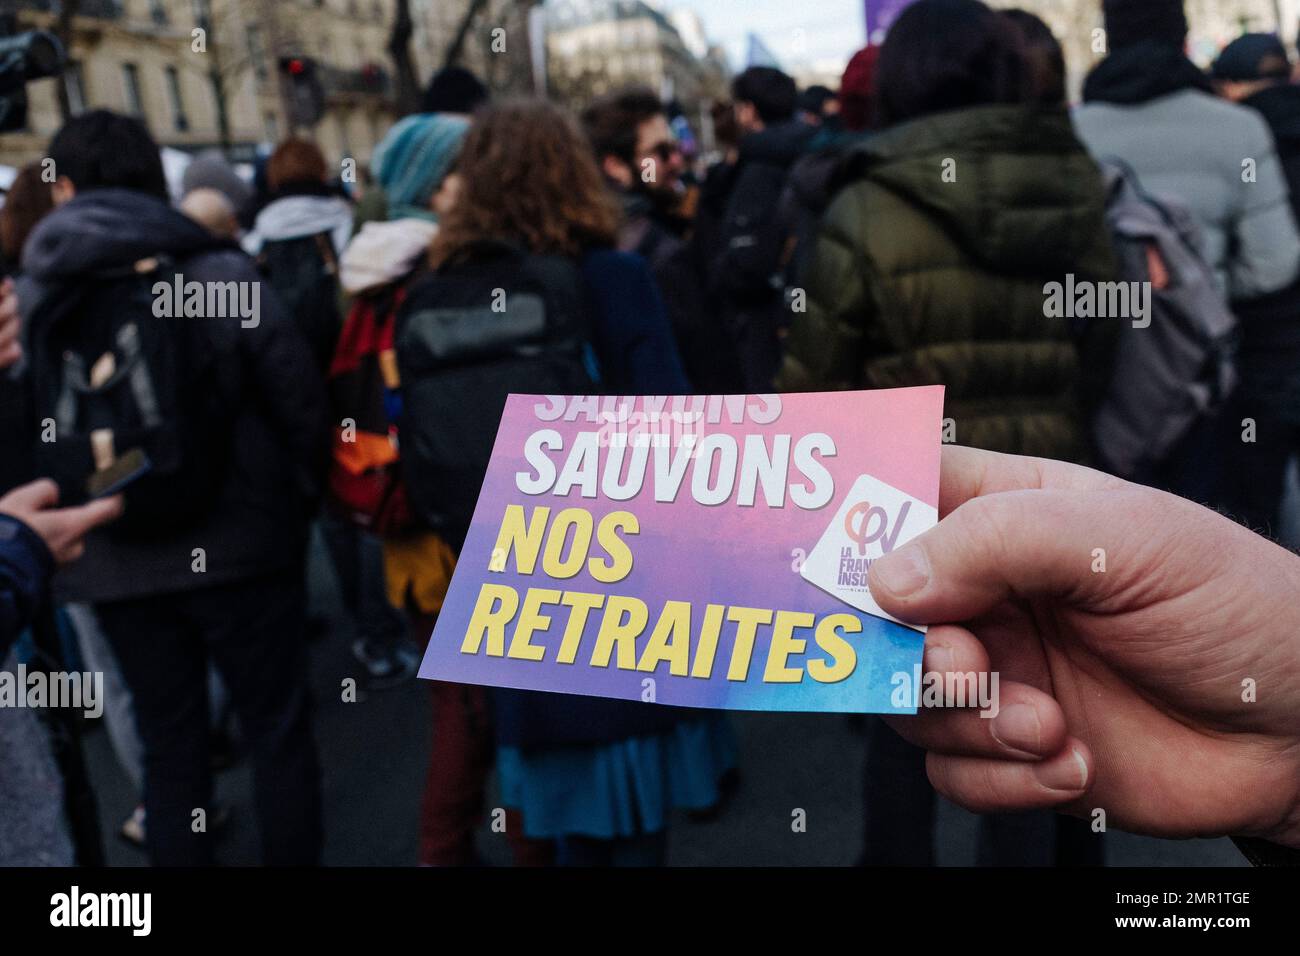 France / Paris, 31/01/2023, Jan Schmidt-Whitley/Le Pictorium -  Strike against pension reform in Paris  -  31/1/2023  -  France / Paris / Paris  -  Sticker 'Save our pensions'. Demonstration against the pension reform in Paris. The trade unions are claiming that this Tuesday's processions will be denser than those formed on 19 January. The police also, according to the figures communicated for mid-day. In Paris, the police prefecture announced 87,000 demonstrators, while the CGT claimed more than 500,000 demonstrators. Stock Photo